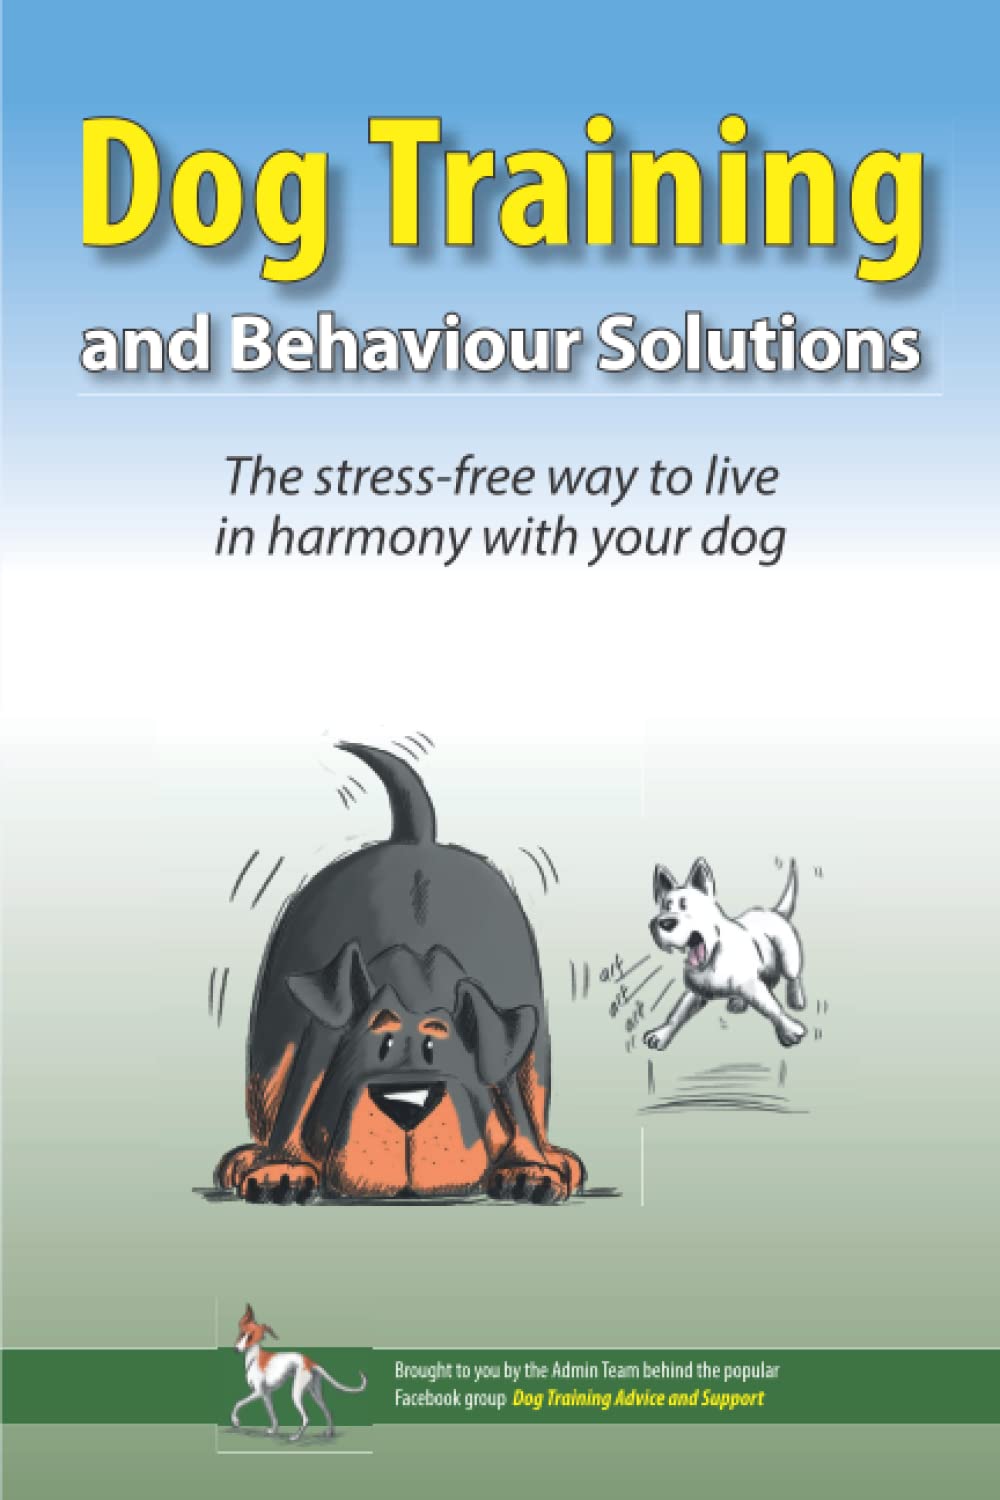 Dog-Training-and-Behaviour-Solutions-The-stress-free-way-to-live.jpg